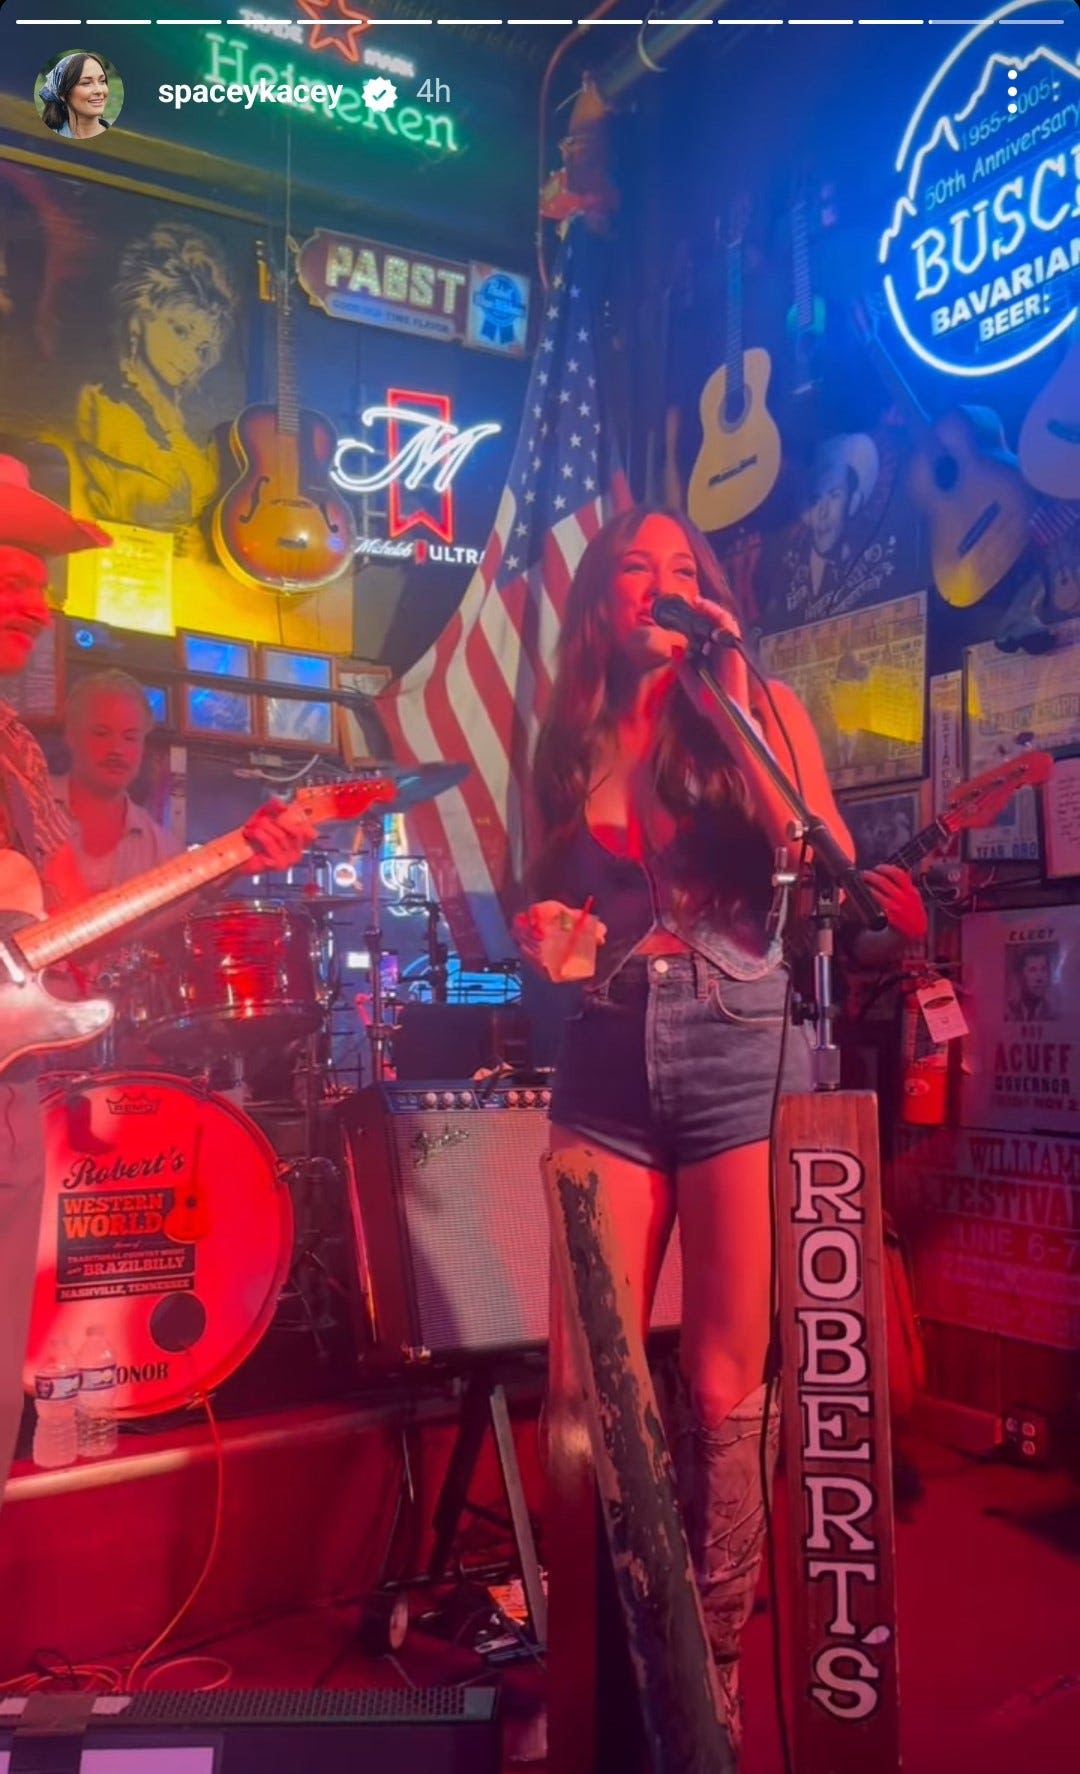 Kacey Musgraves surprises guests at Robert's Western World after Zach Bryan show